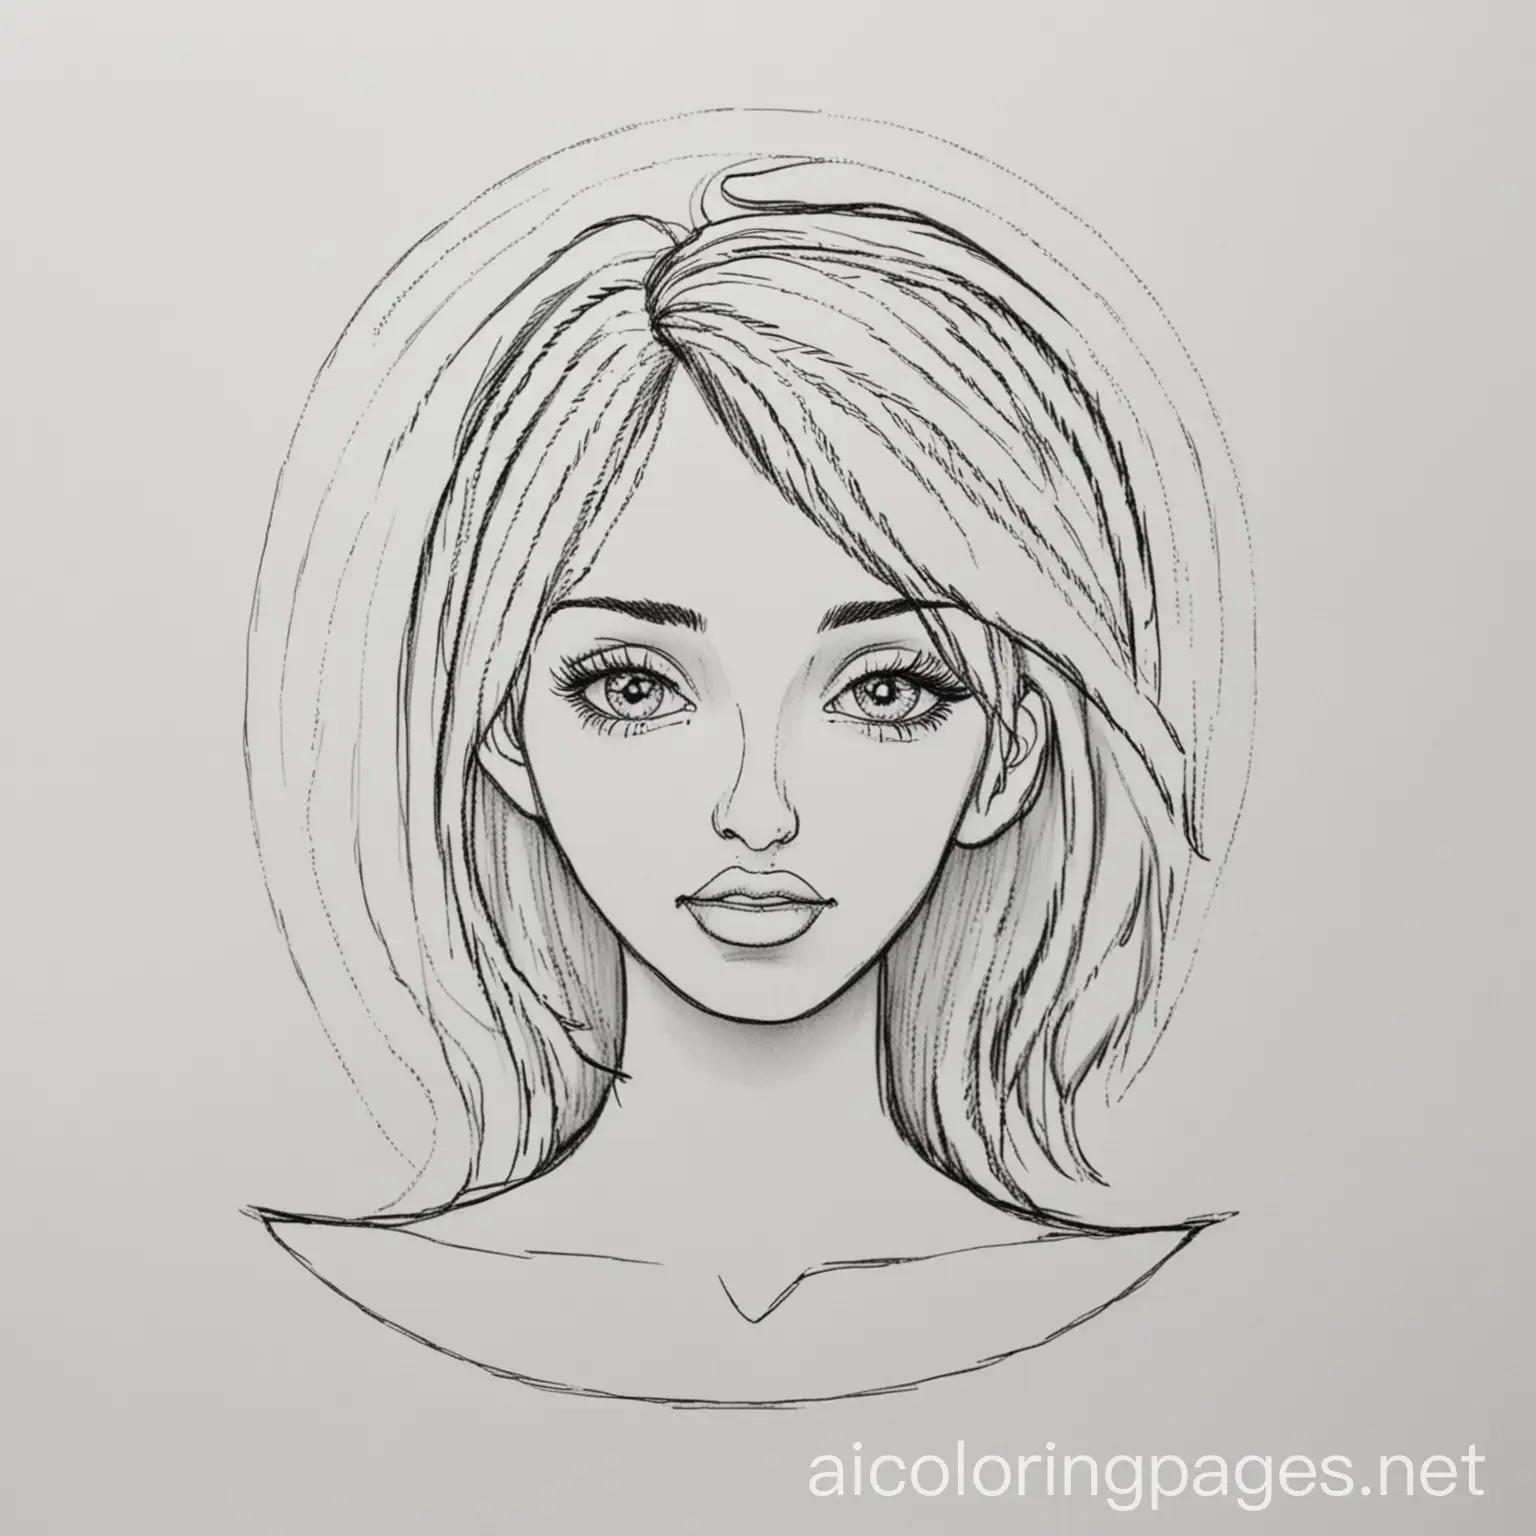 Simplicity-in-Black-and-White-Minimalistic-Coloring-Page-with-Ample-White-Space